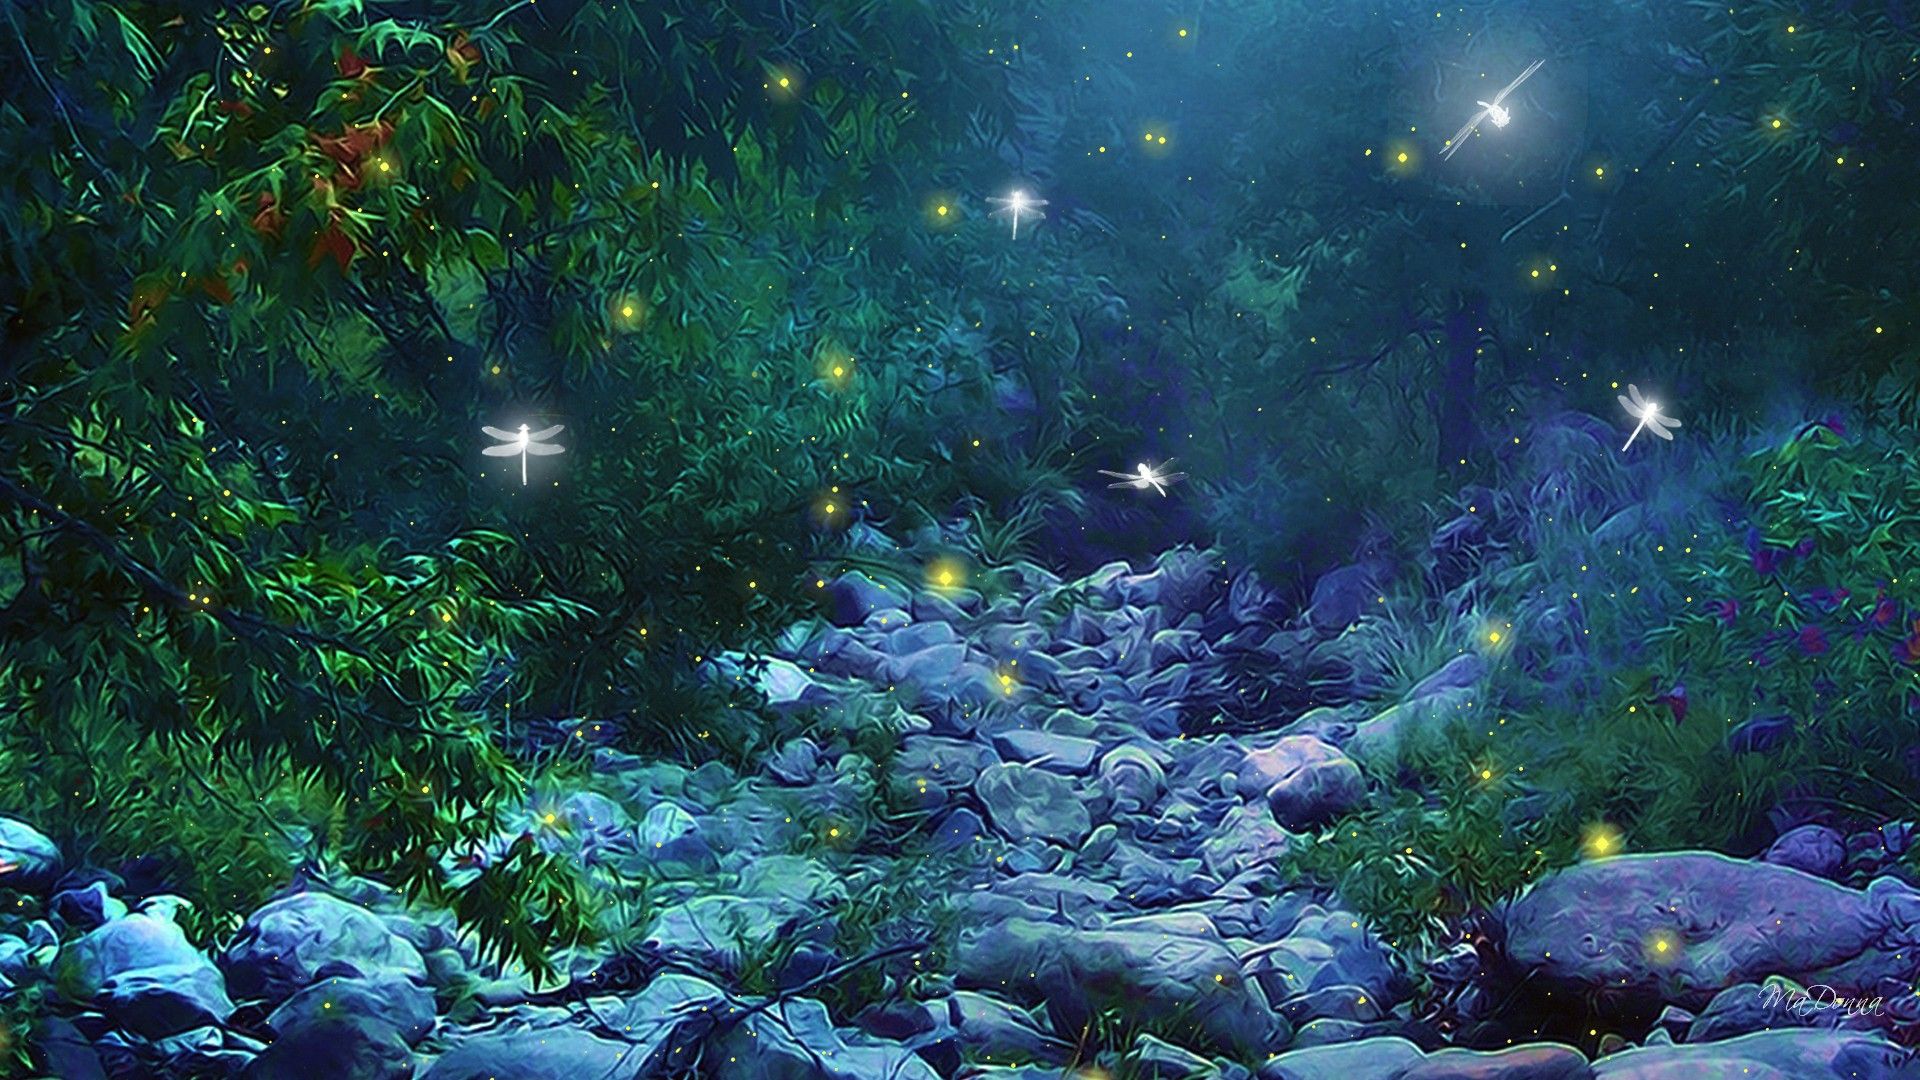 Fantasy art nature trees forest woods magic insects firefly night glow lights wallpaperx1080